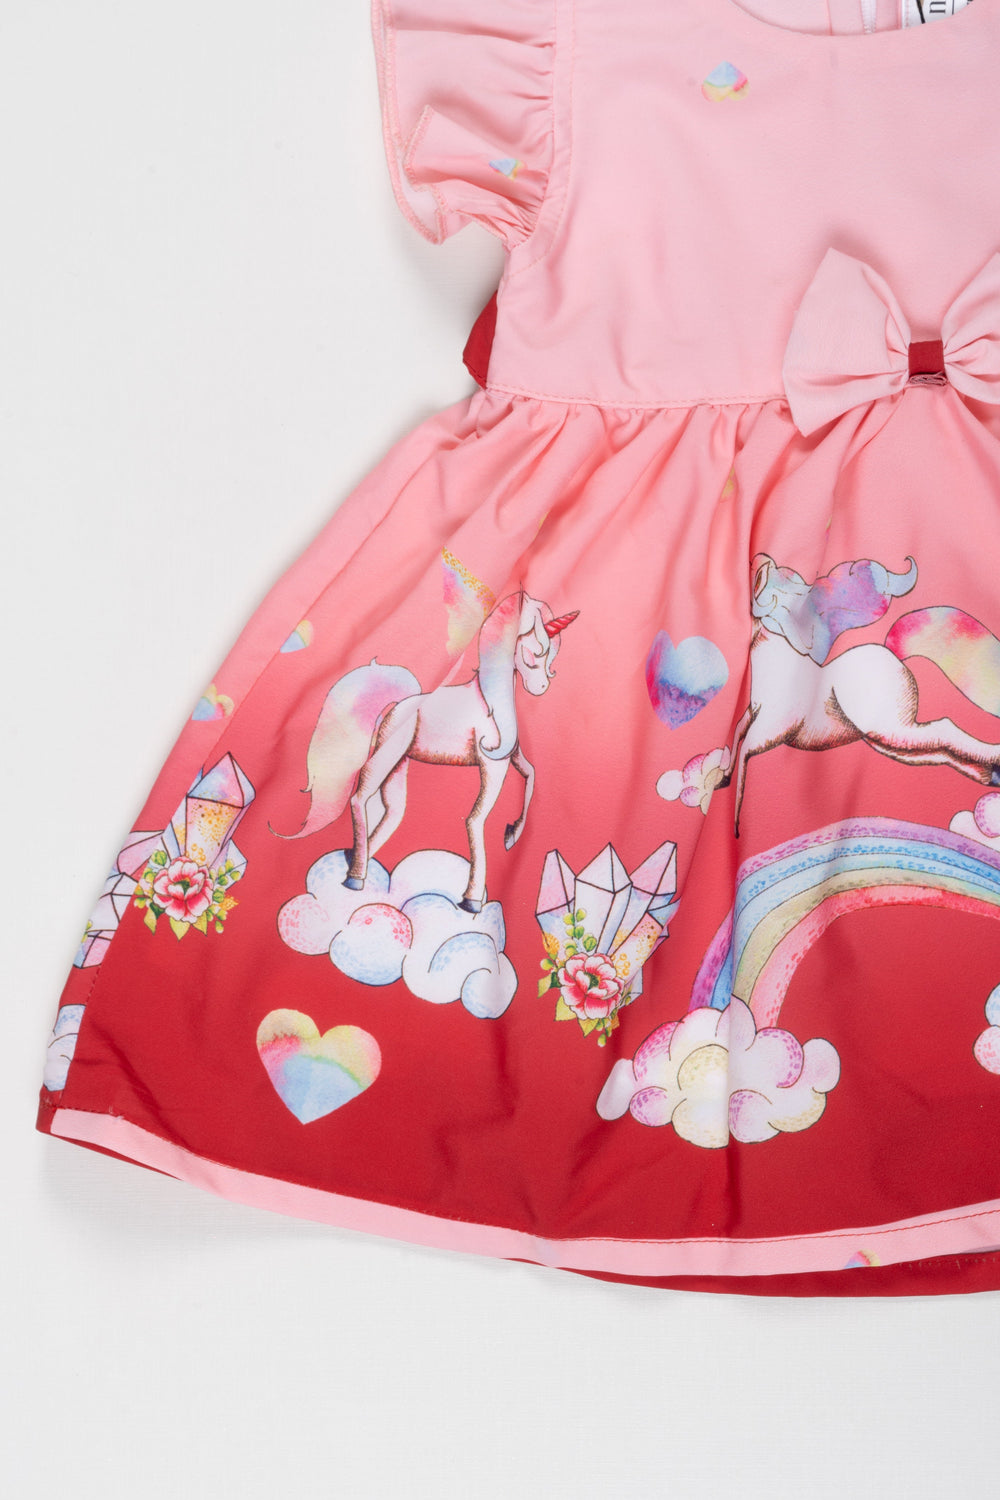 The Nesavu Baby Fancy Frock Baby Girl's Enchanted Unicorn Party Dress with Rainbow and Hearts Nesavu Magical Unicorn and Rainbow Dress for Baby Girls | Perfect for Parties | The Nesavu